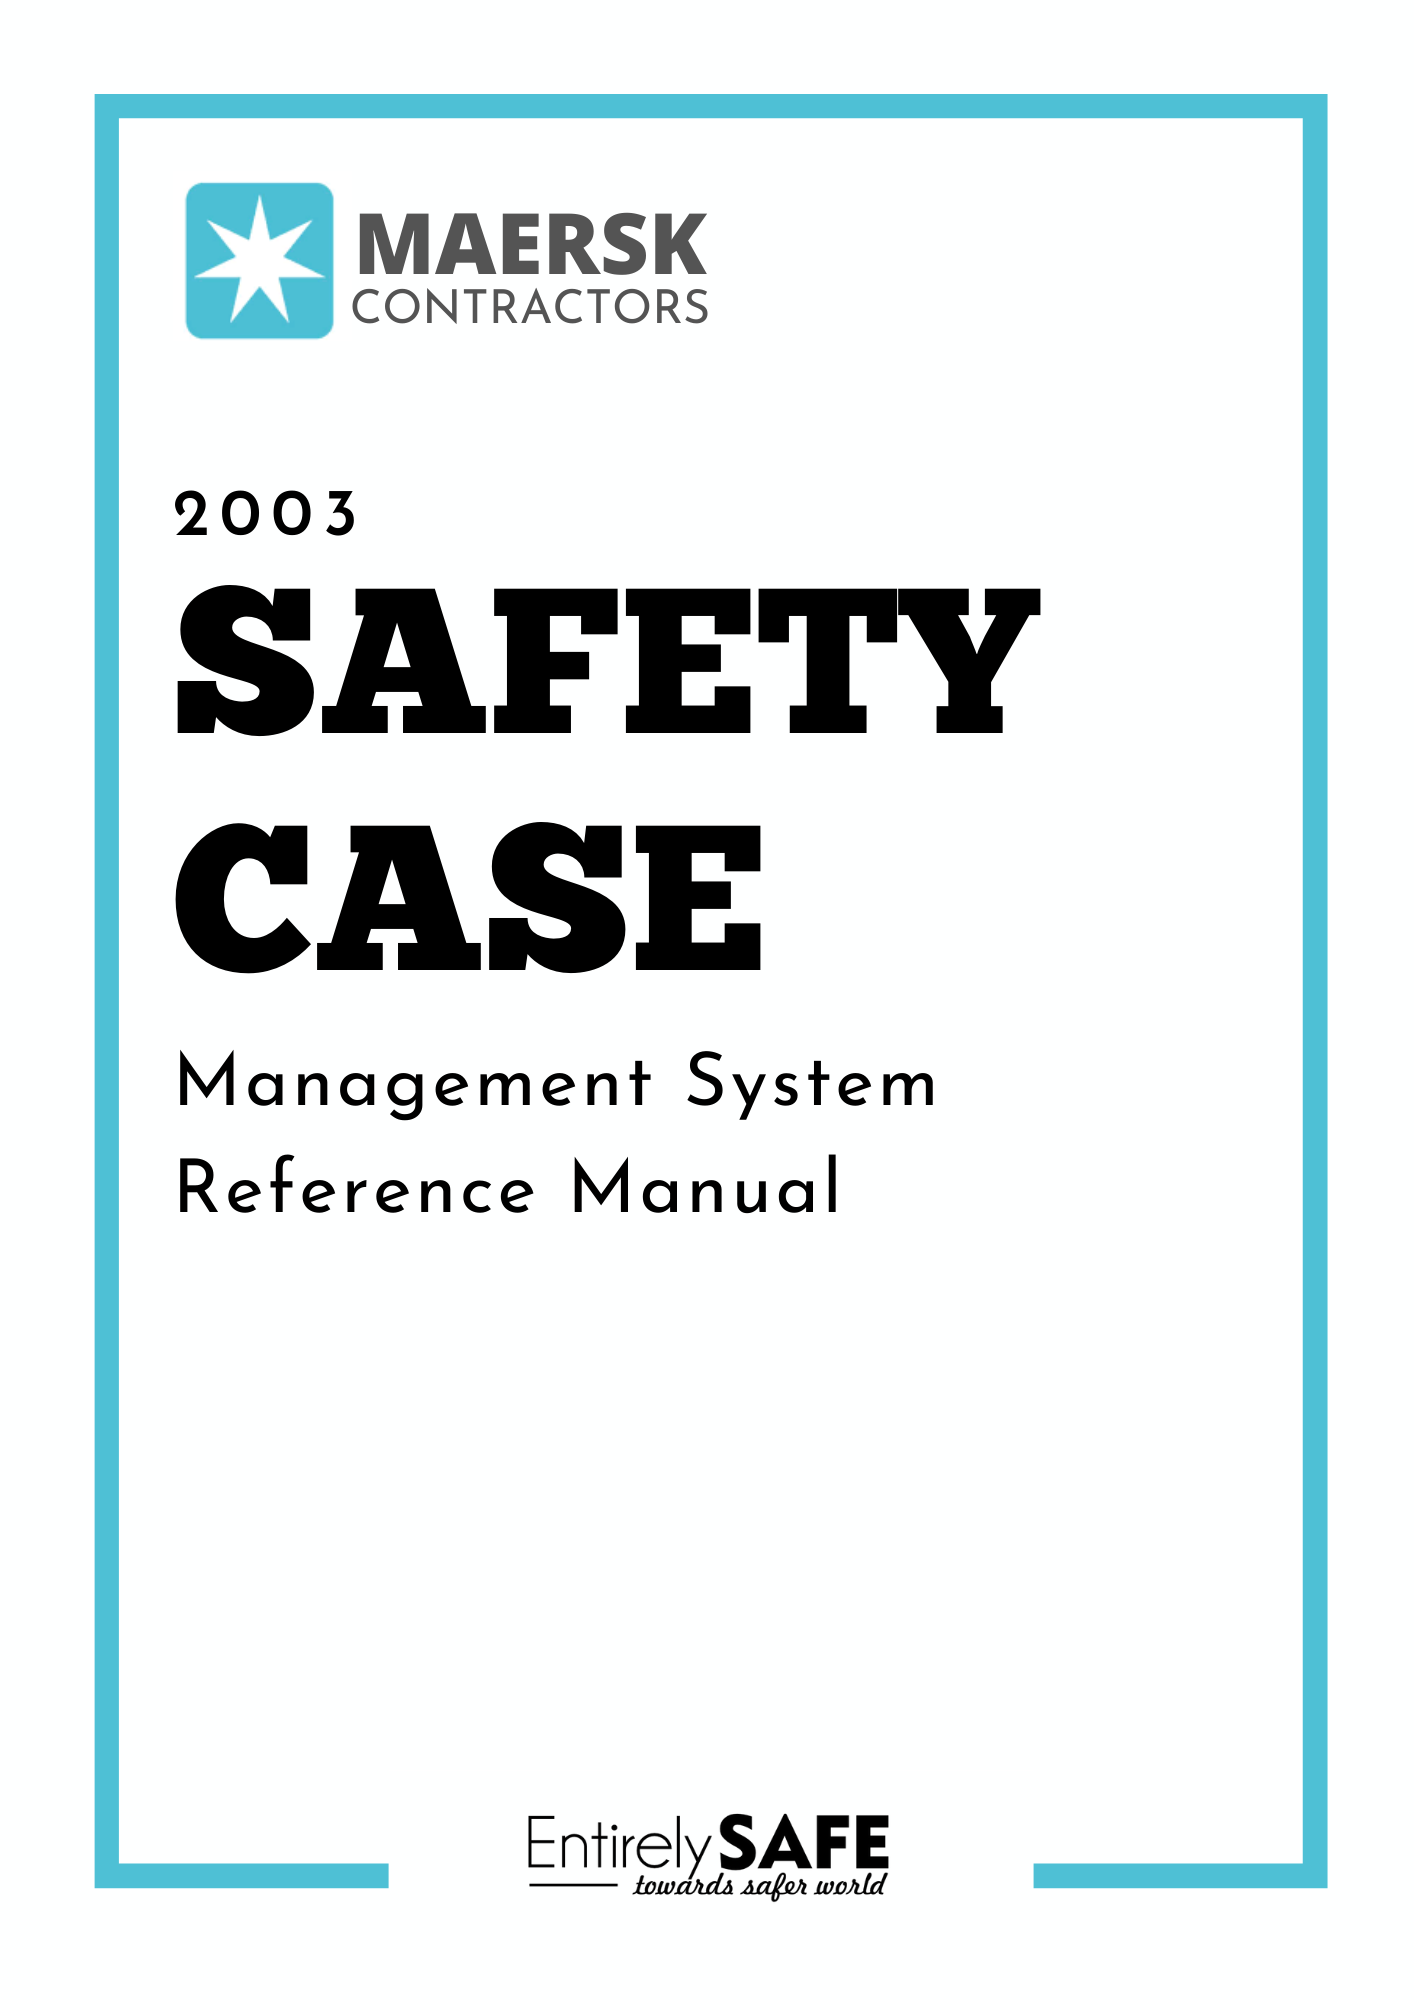 #145-FREE-Download-Safety-Case-Maersk-Contractors